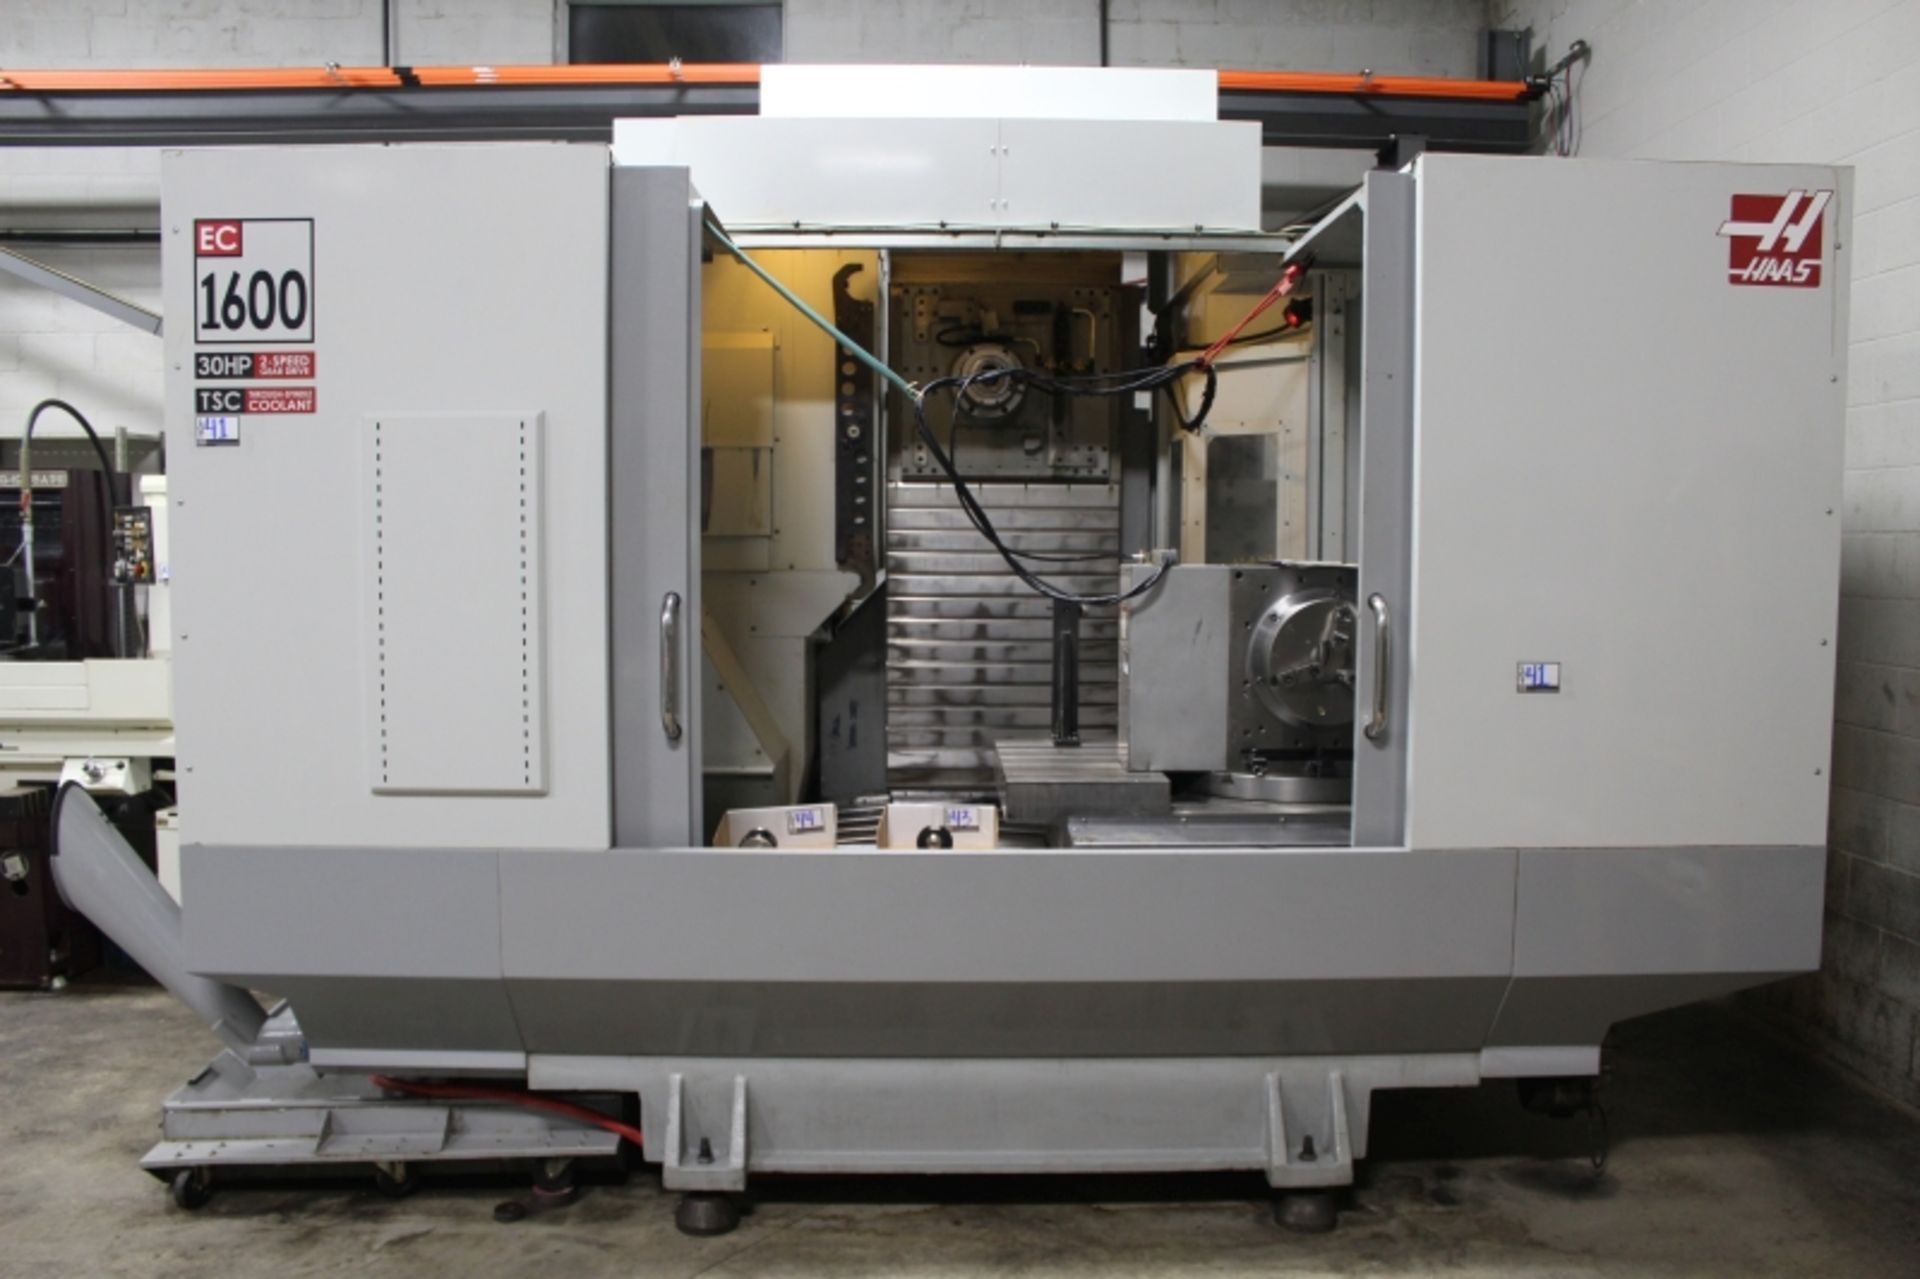 Haas EC-1600-4X, 5-Axis, 64” x 50” x 32” trvls, 7500 RPM, CT50, 30 ATC, CTS, S/N 2052737, New - Image 5 of 13